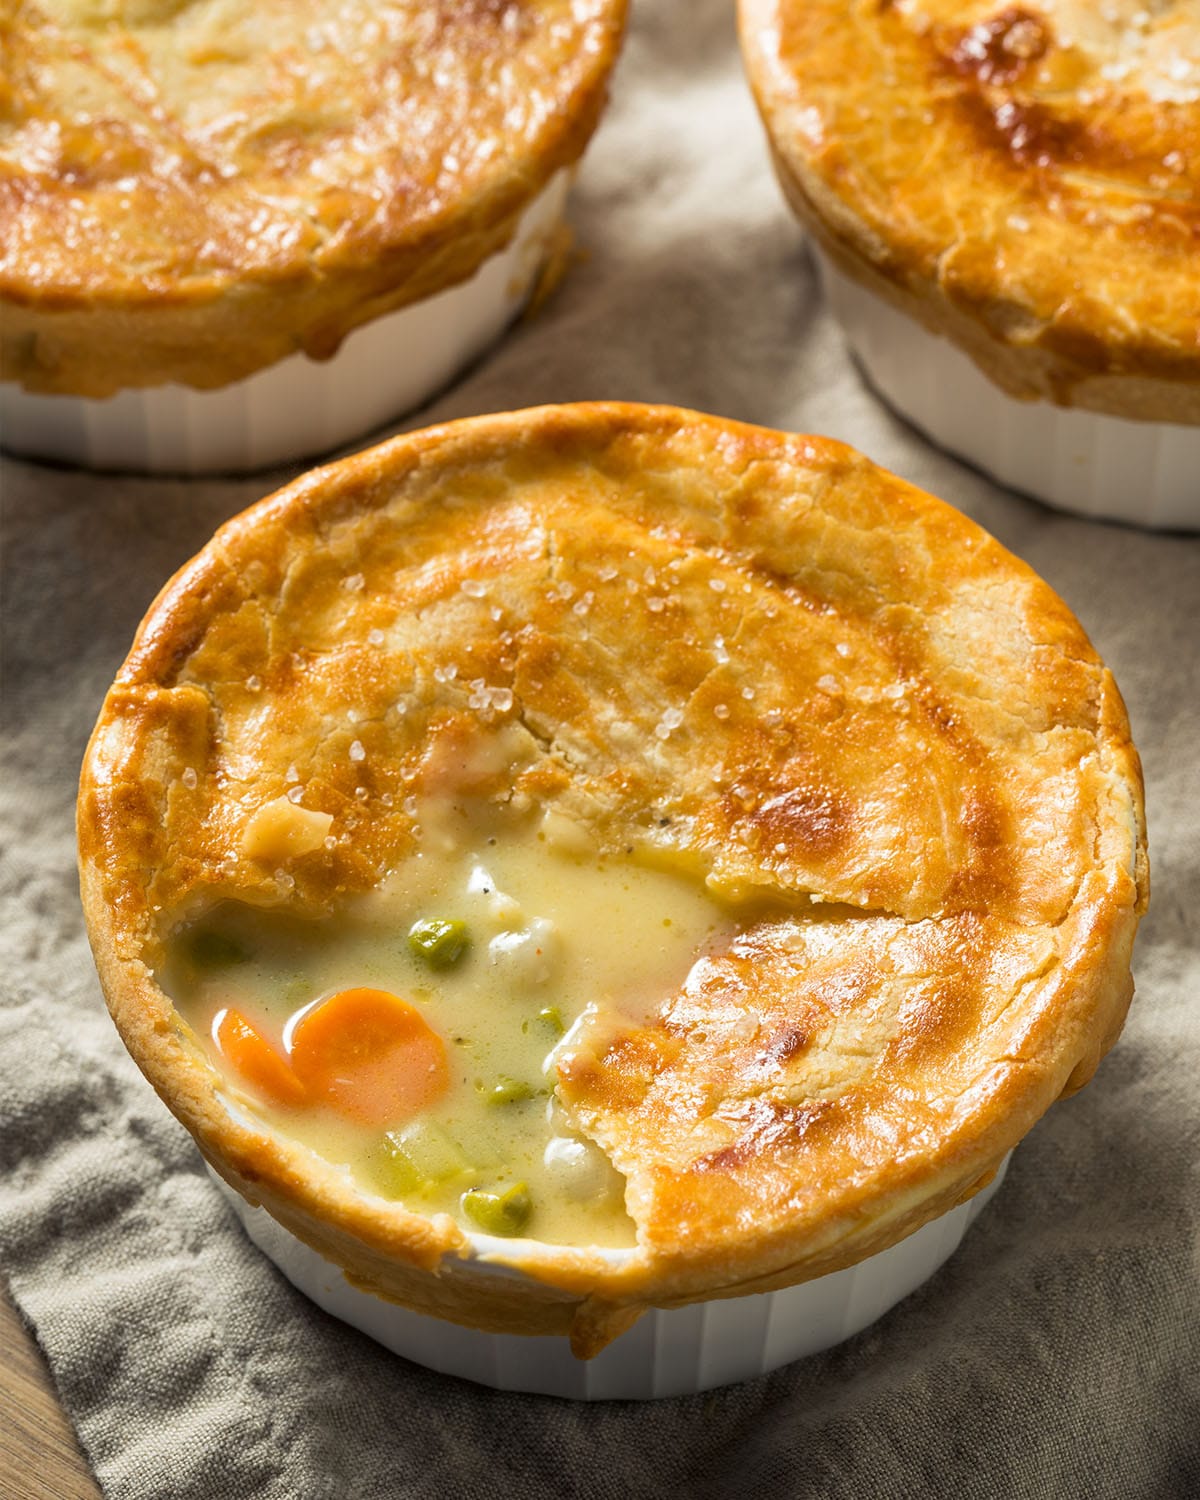 The best way to reheat frozen chicken pot pie is in the oven. This will help keep the crust crispy and prevent the filling from getting watery.